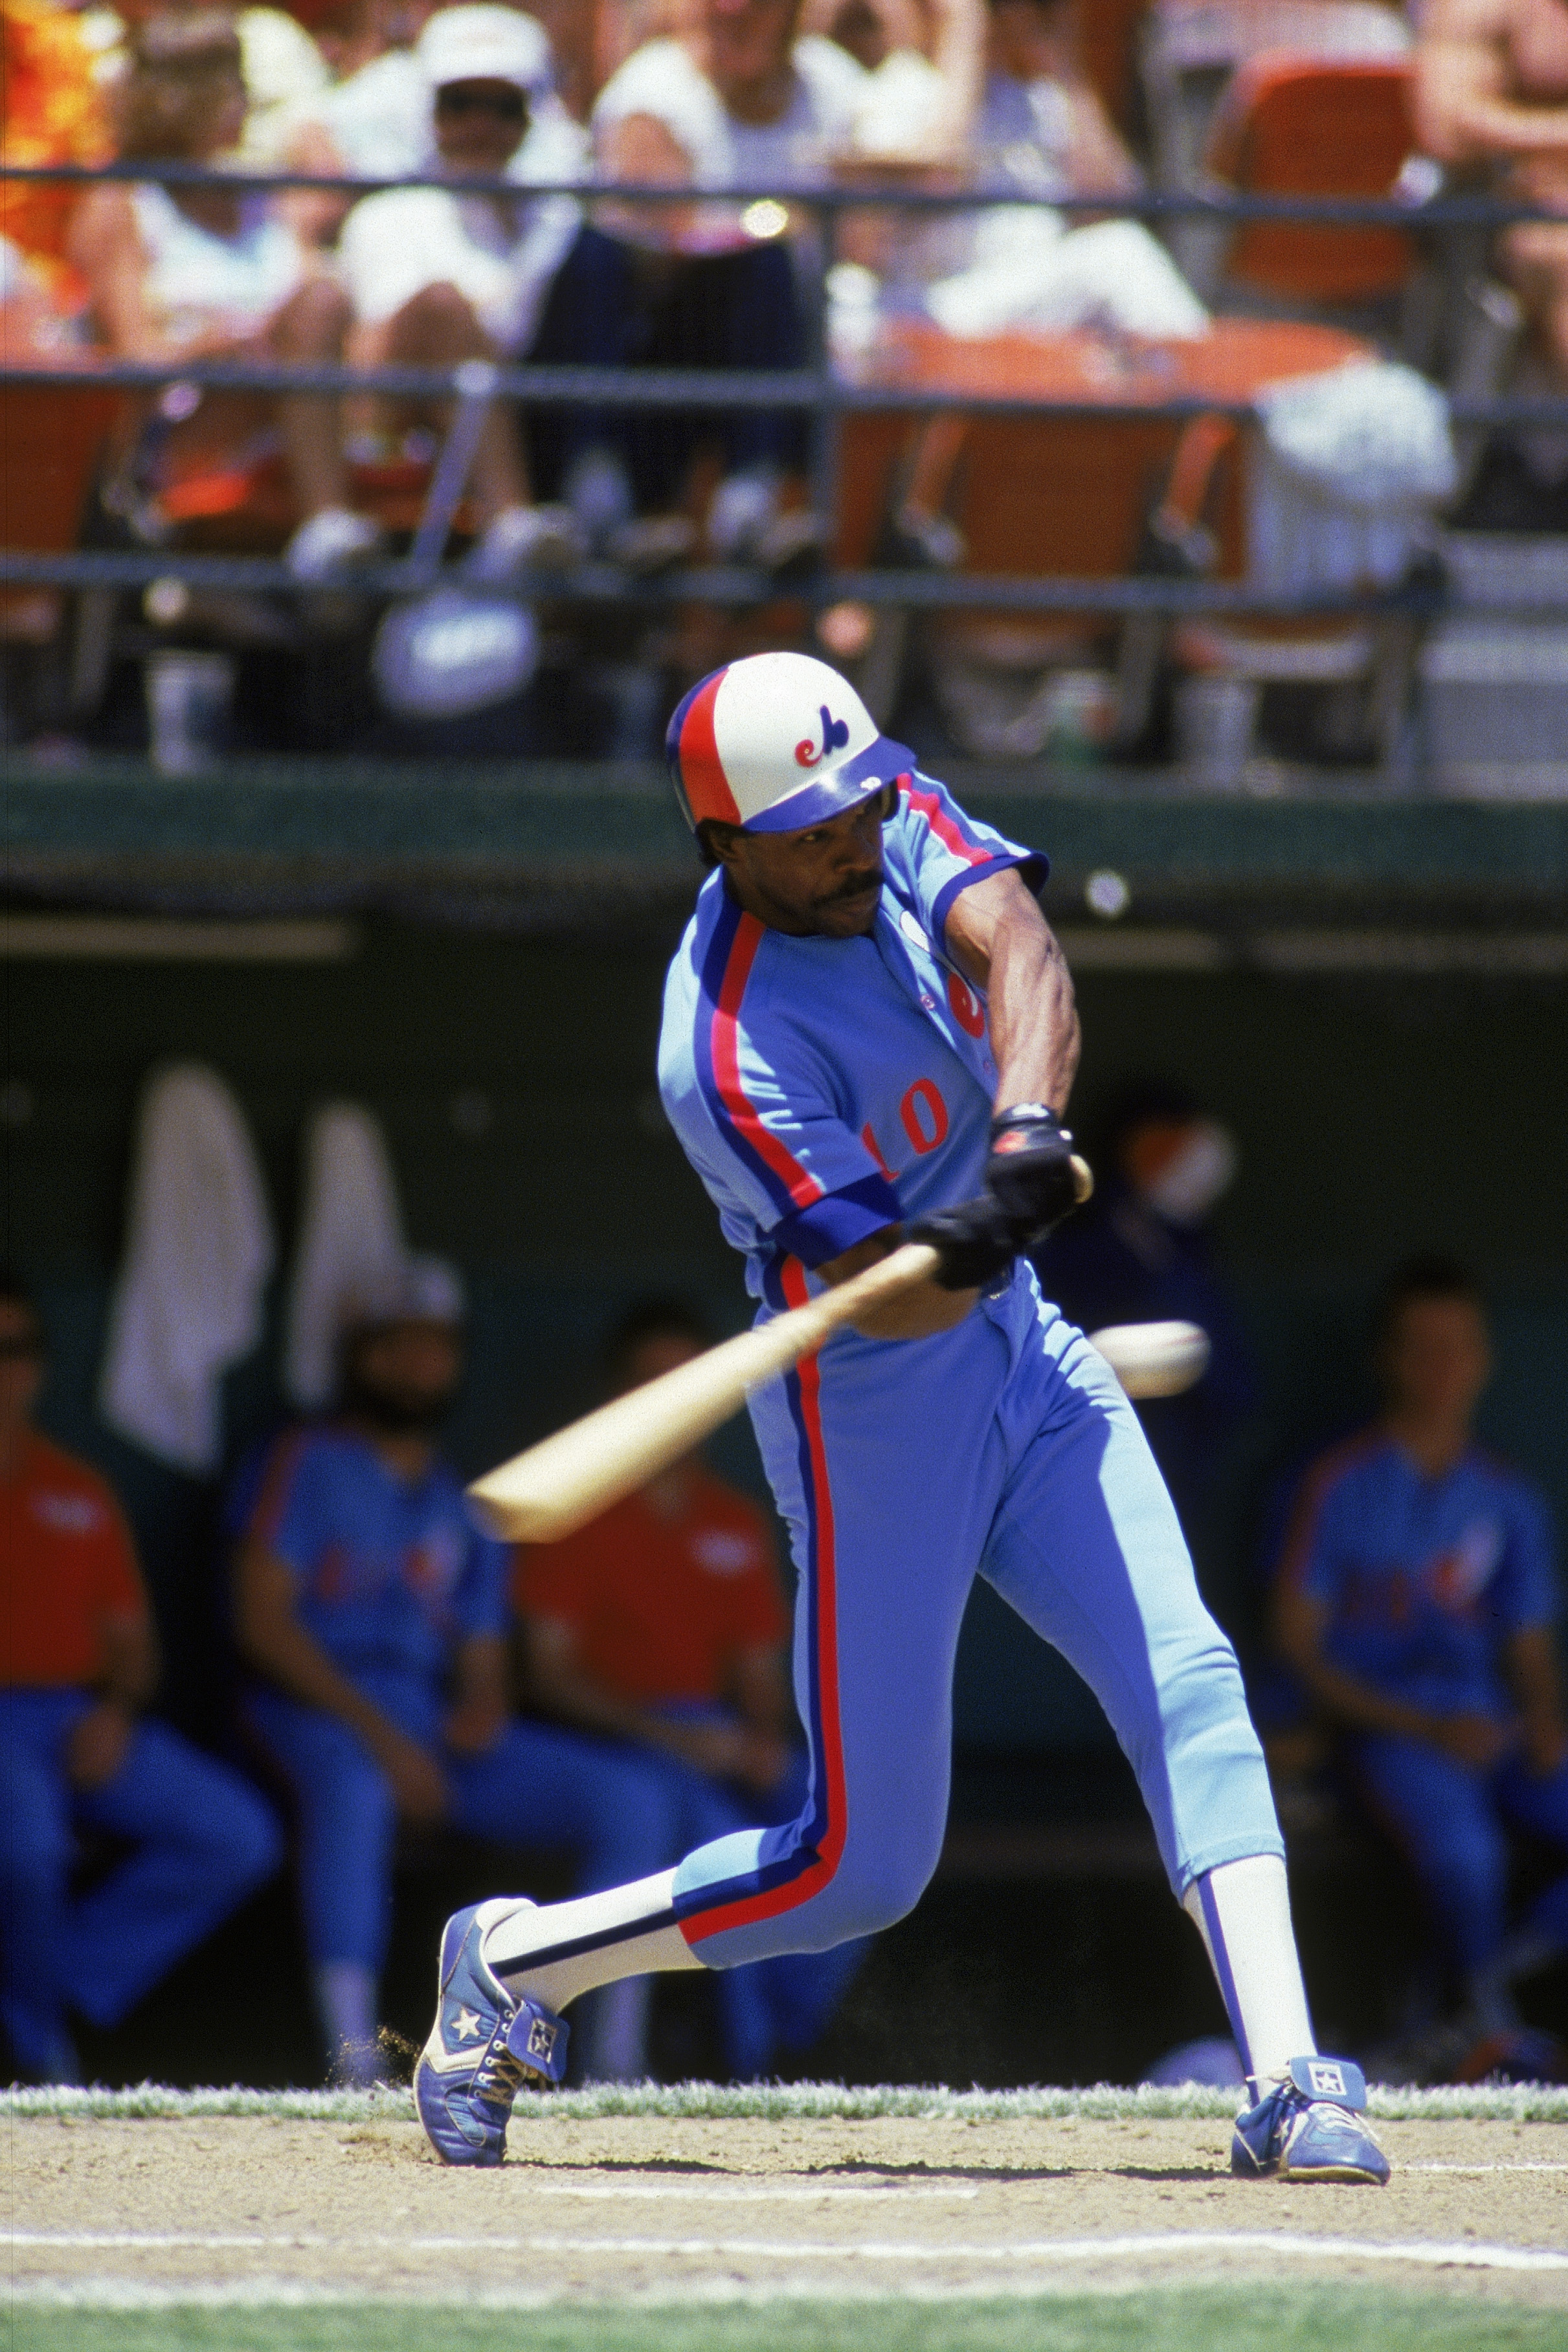 SAN DIEGO - 1986:  Andre Dawson #10 of the Montreal Expos looks to connect with the pitch during a 1986 season game against the San Diego Padres at Jack Murphy Stadium in San Diego, California. (Photo by Rick Stewart/Getty Images)